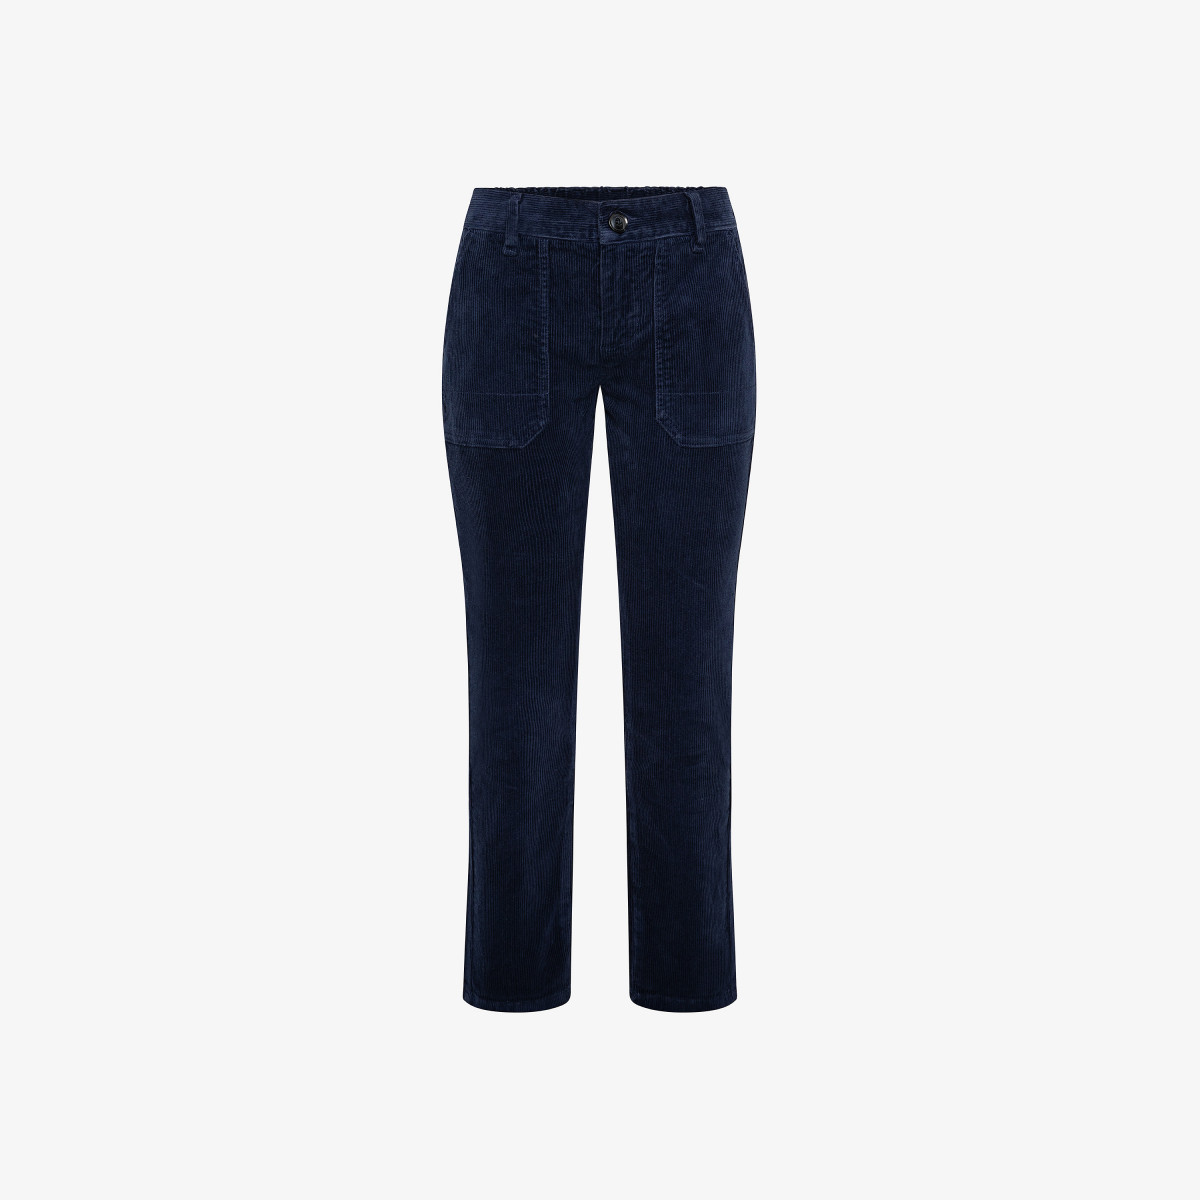 BOY'S PANT COULISSE CORDUROY NAVY BLUE